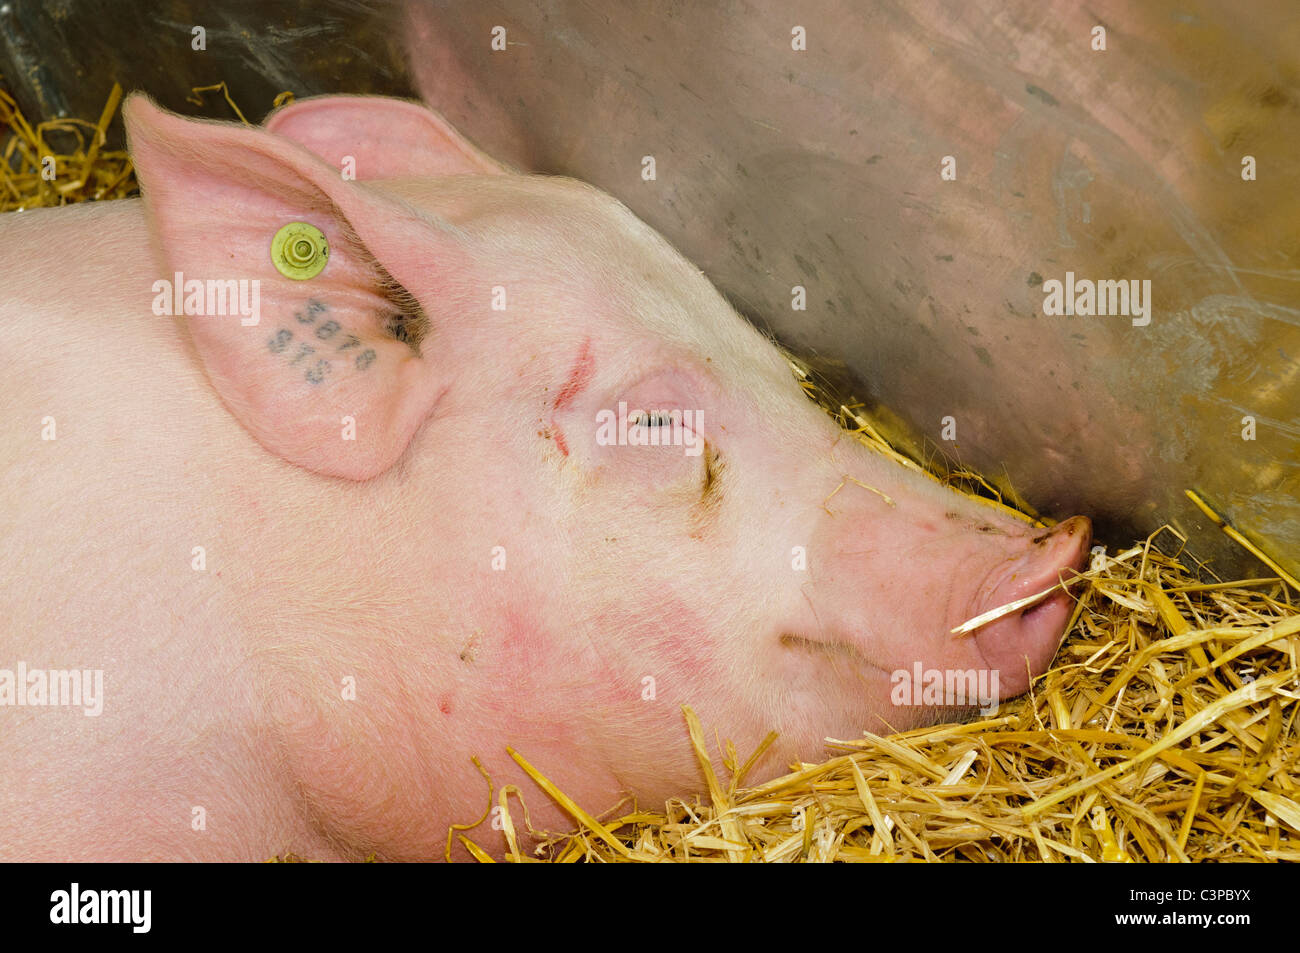 Pink pig with tattooed ear identification mark and RFID ear tag as required by UK law Stock Photo